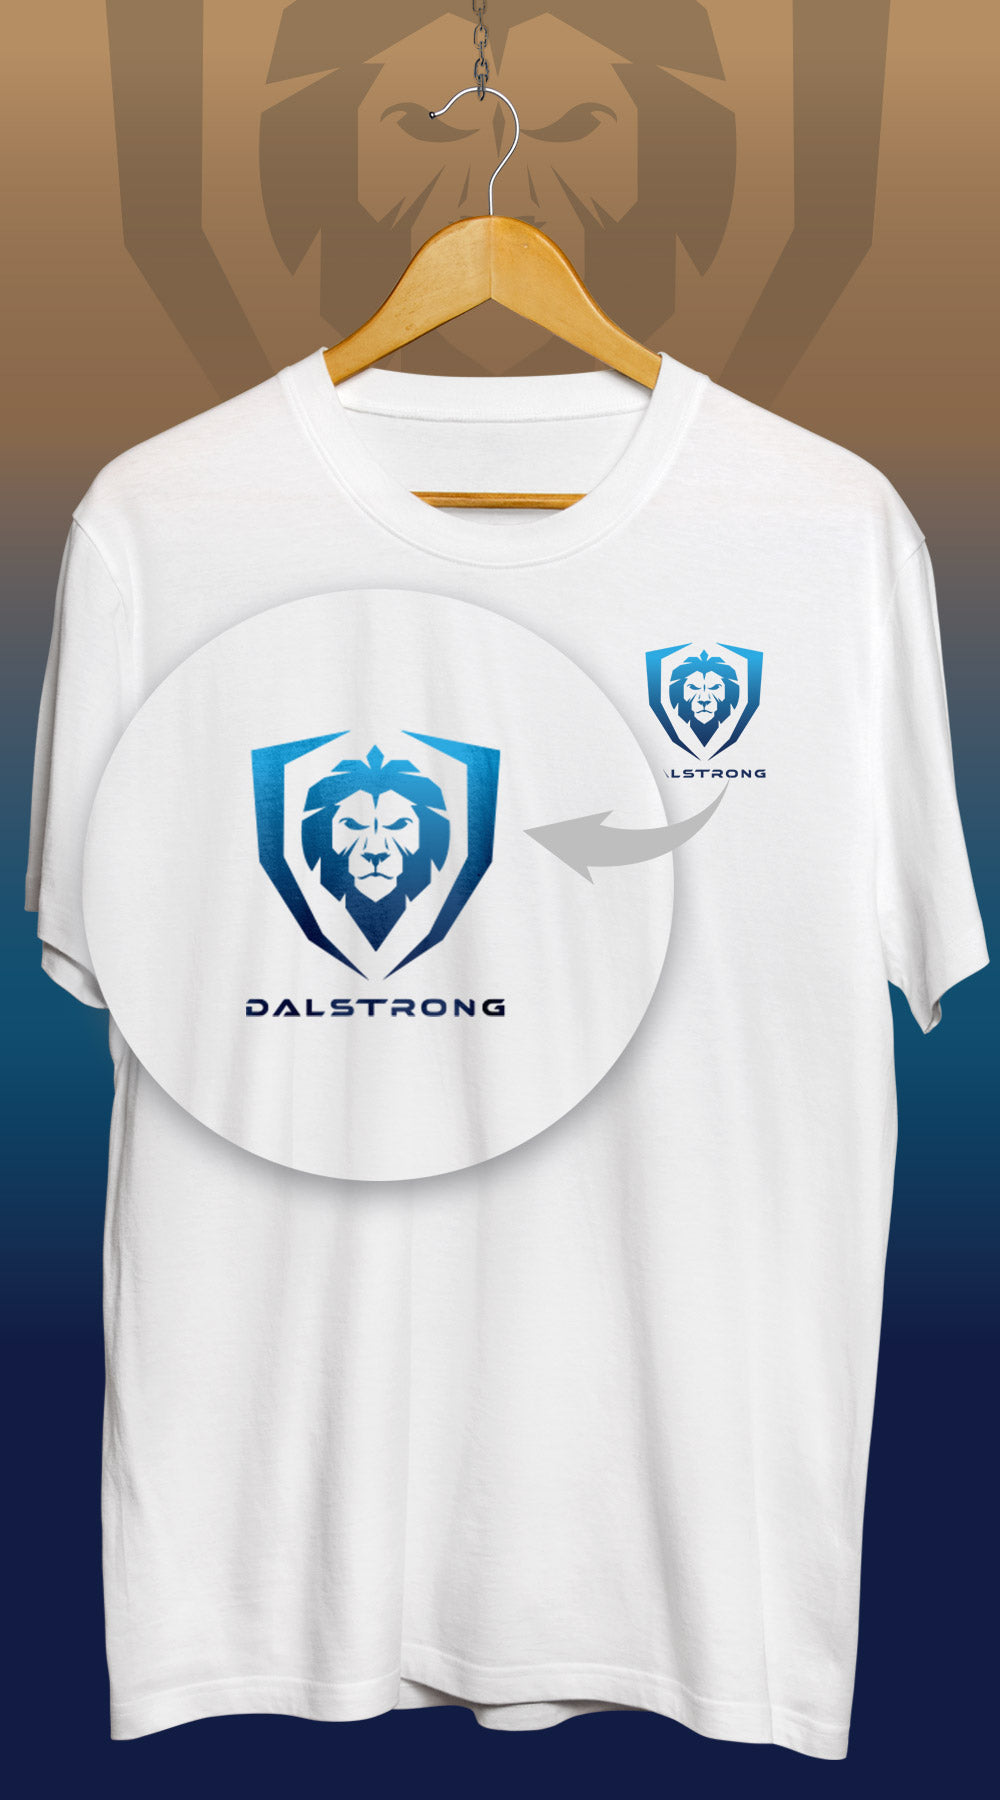 Dalstrong valhalla series tee x arik roper collab white front design with dalstrong name and logo.